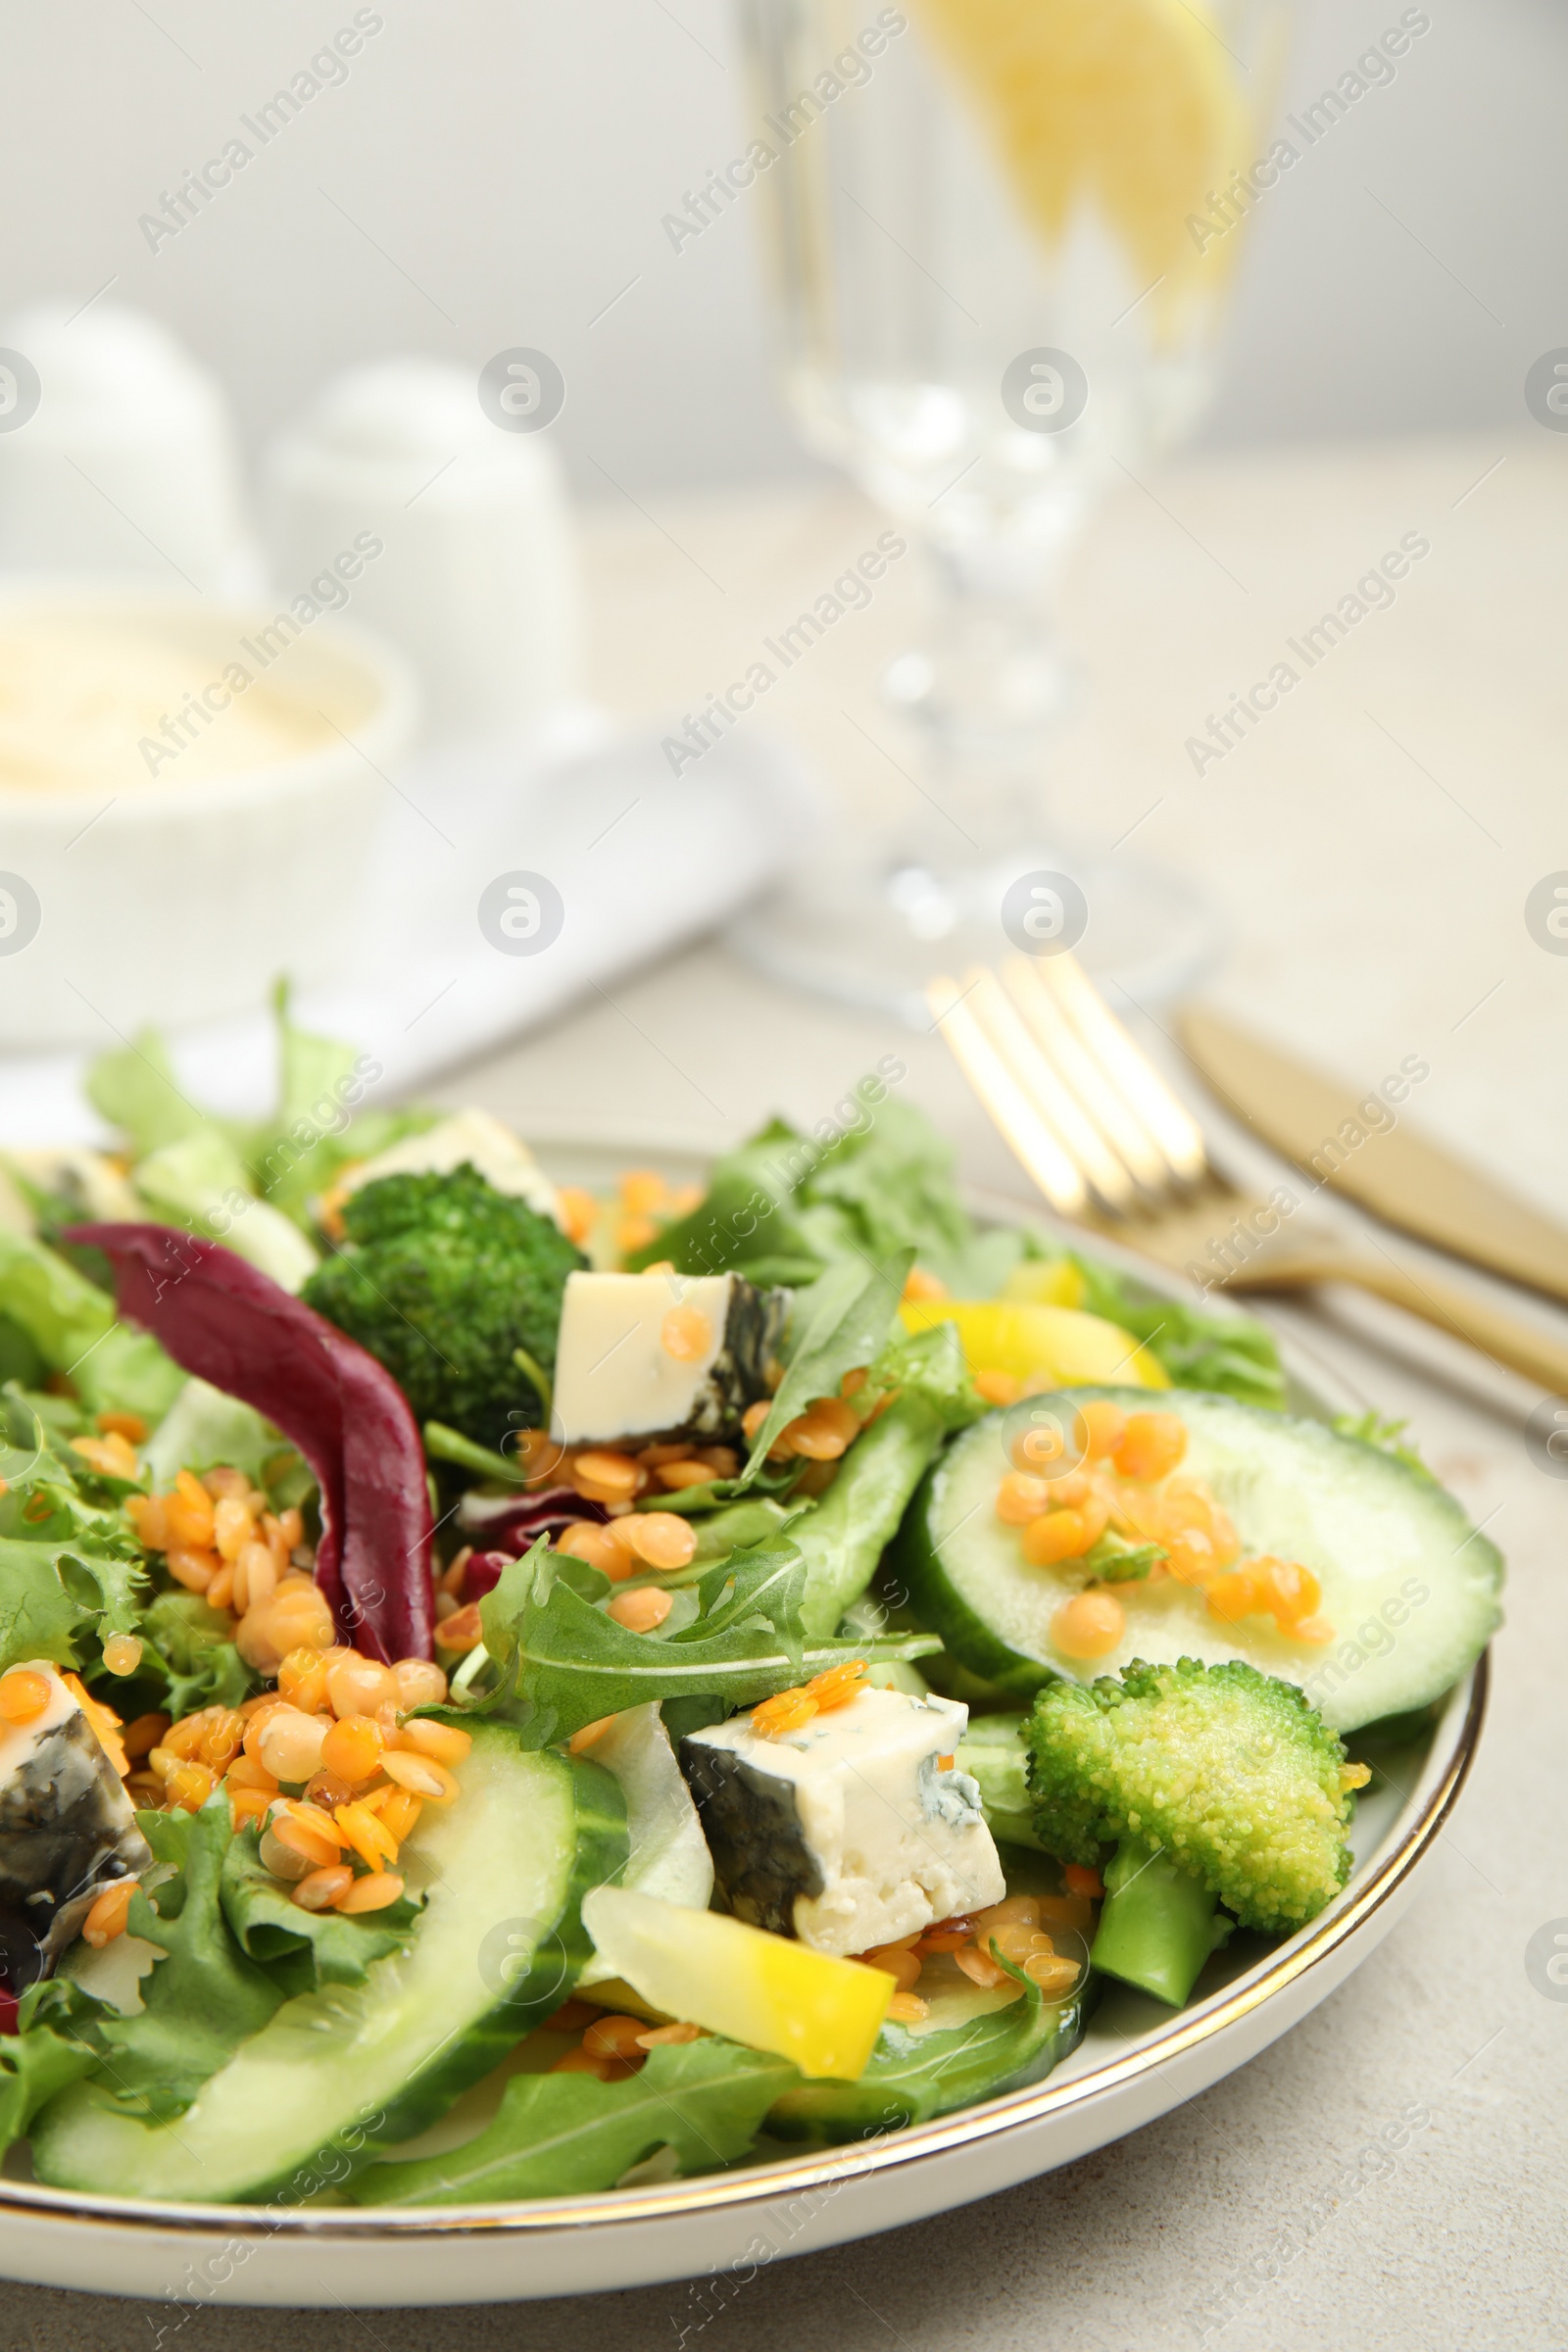 Photo of Delicious salad with lentils, vegetables and cheese served on light grey table